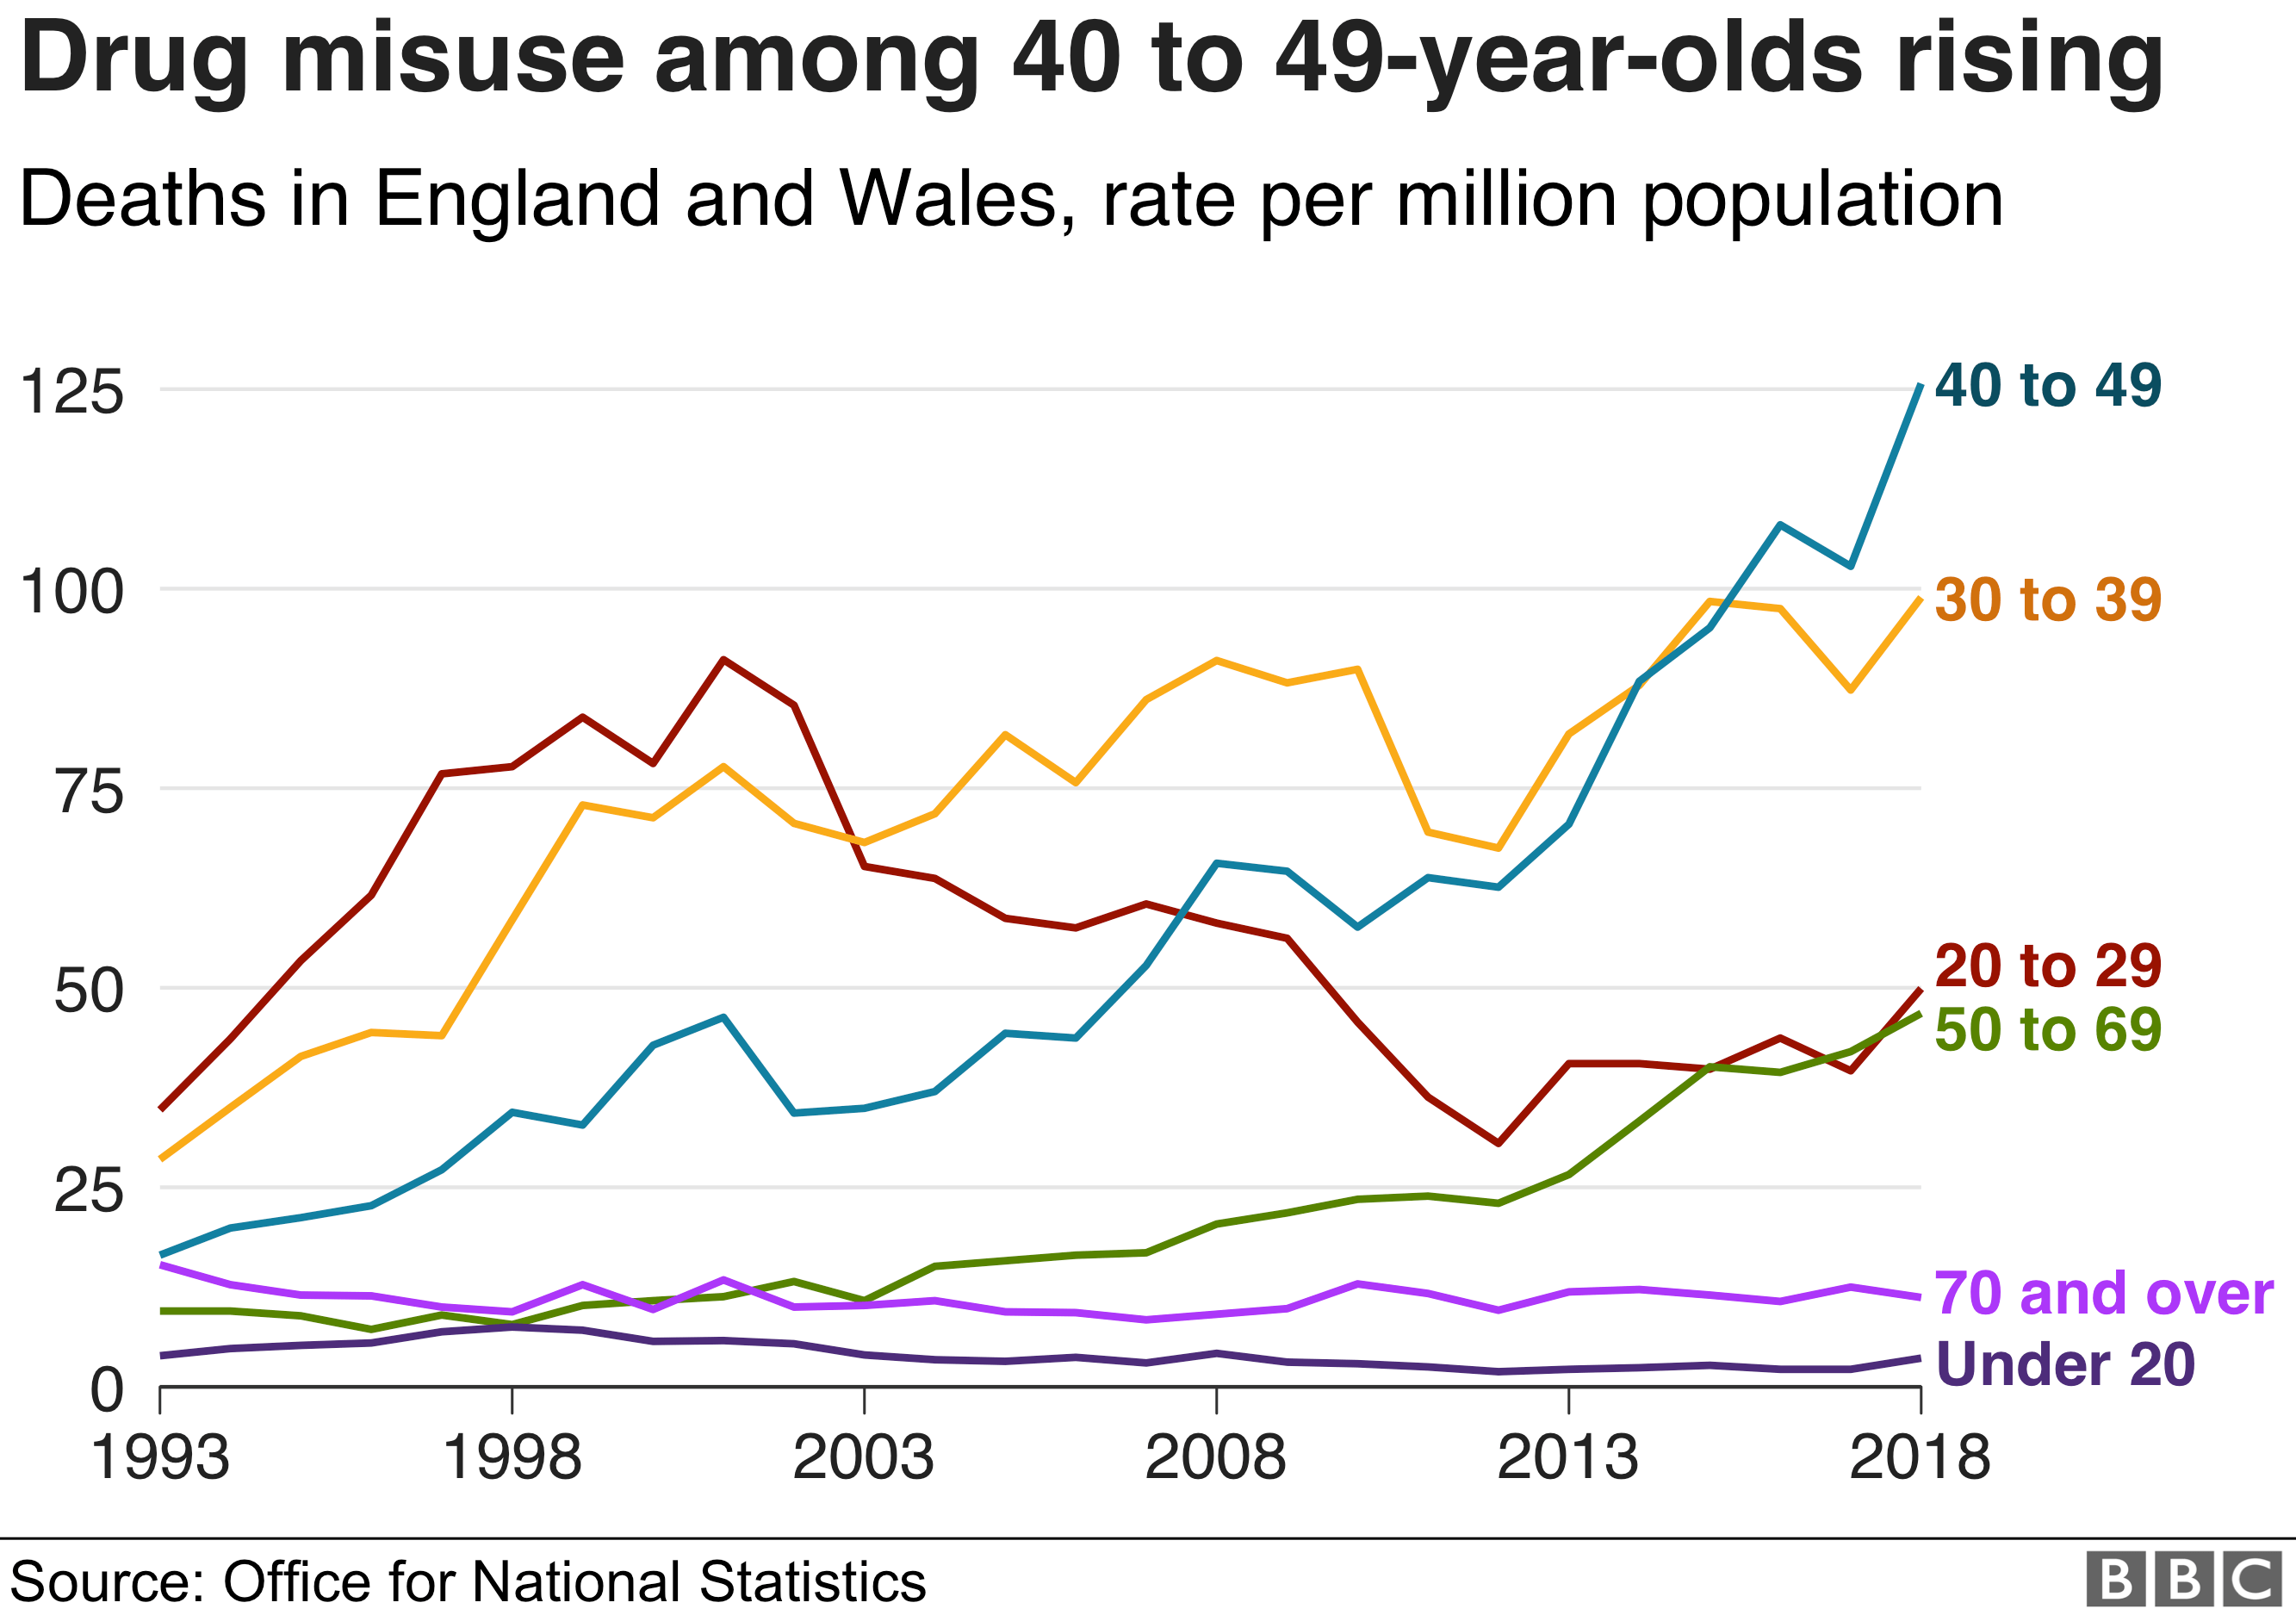 Chart showing mortality rates for drug misuse deaths in England and Wales by age group